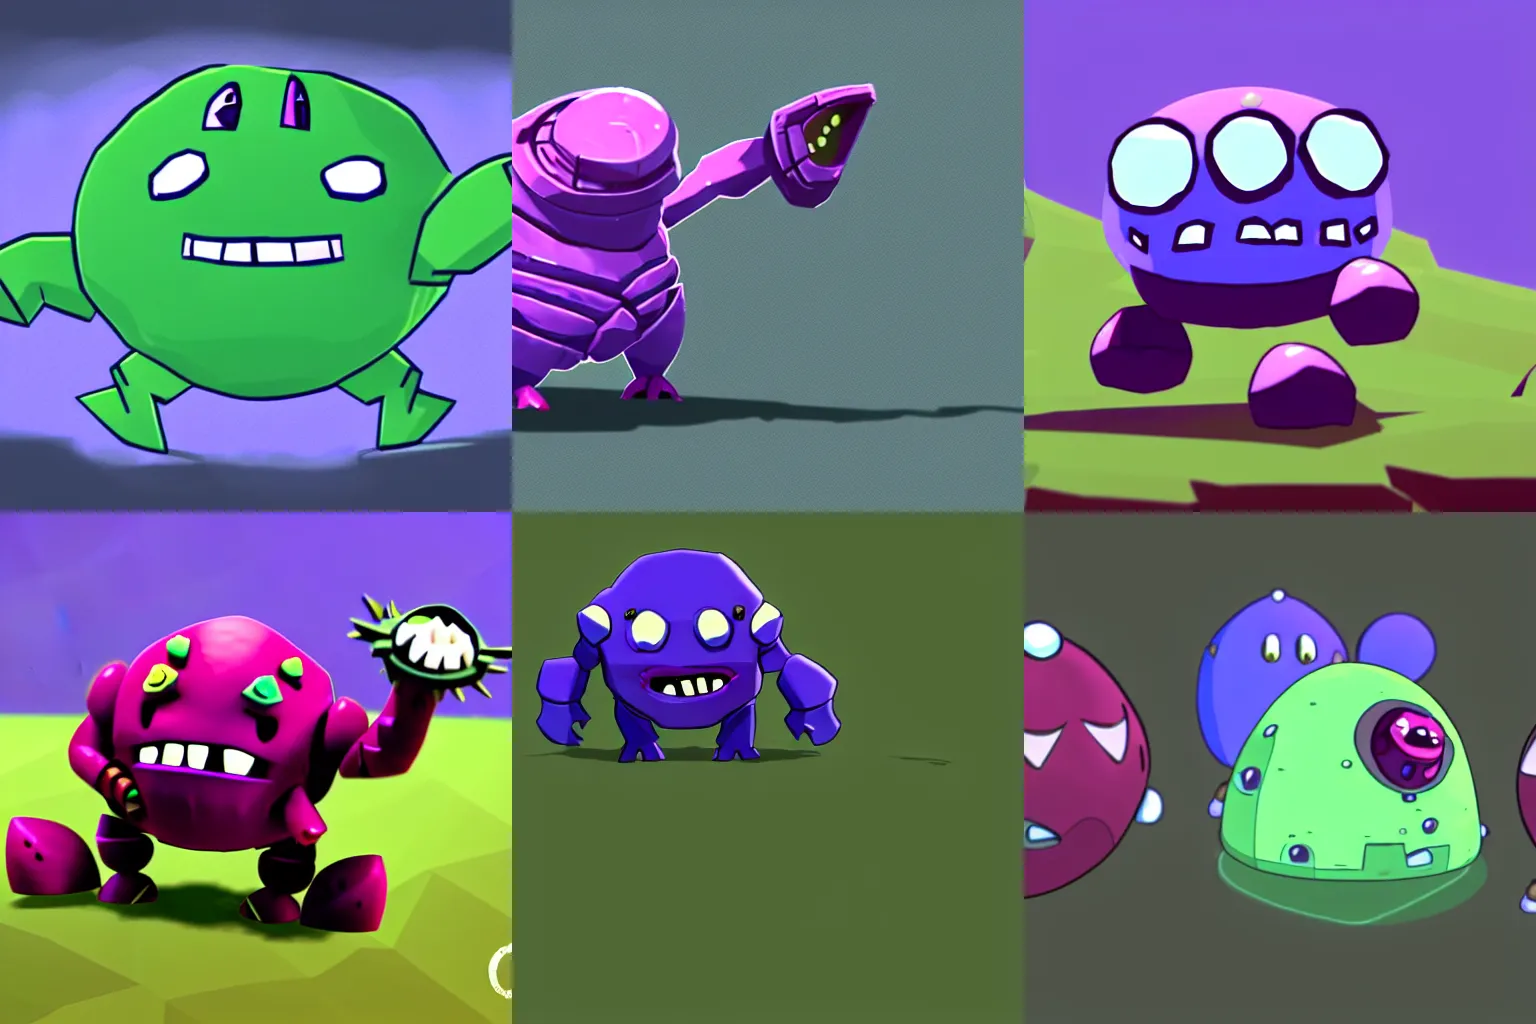 Prompt: a zergling, in carbot animation style